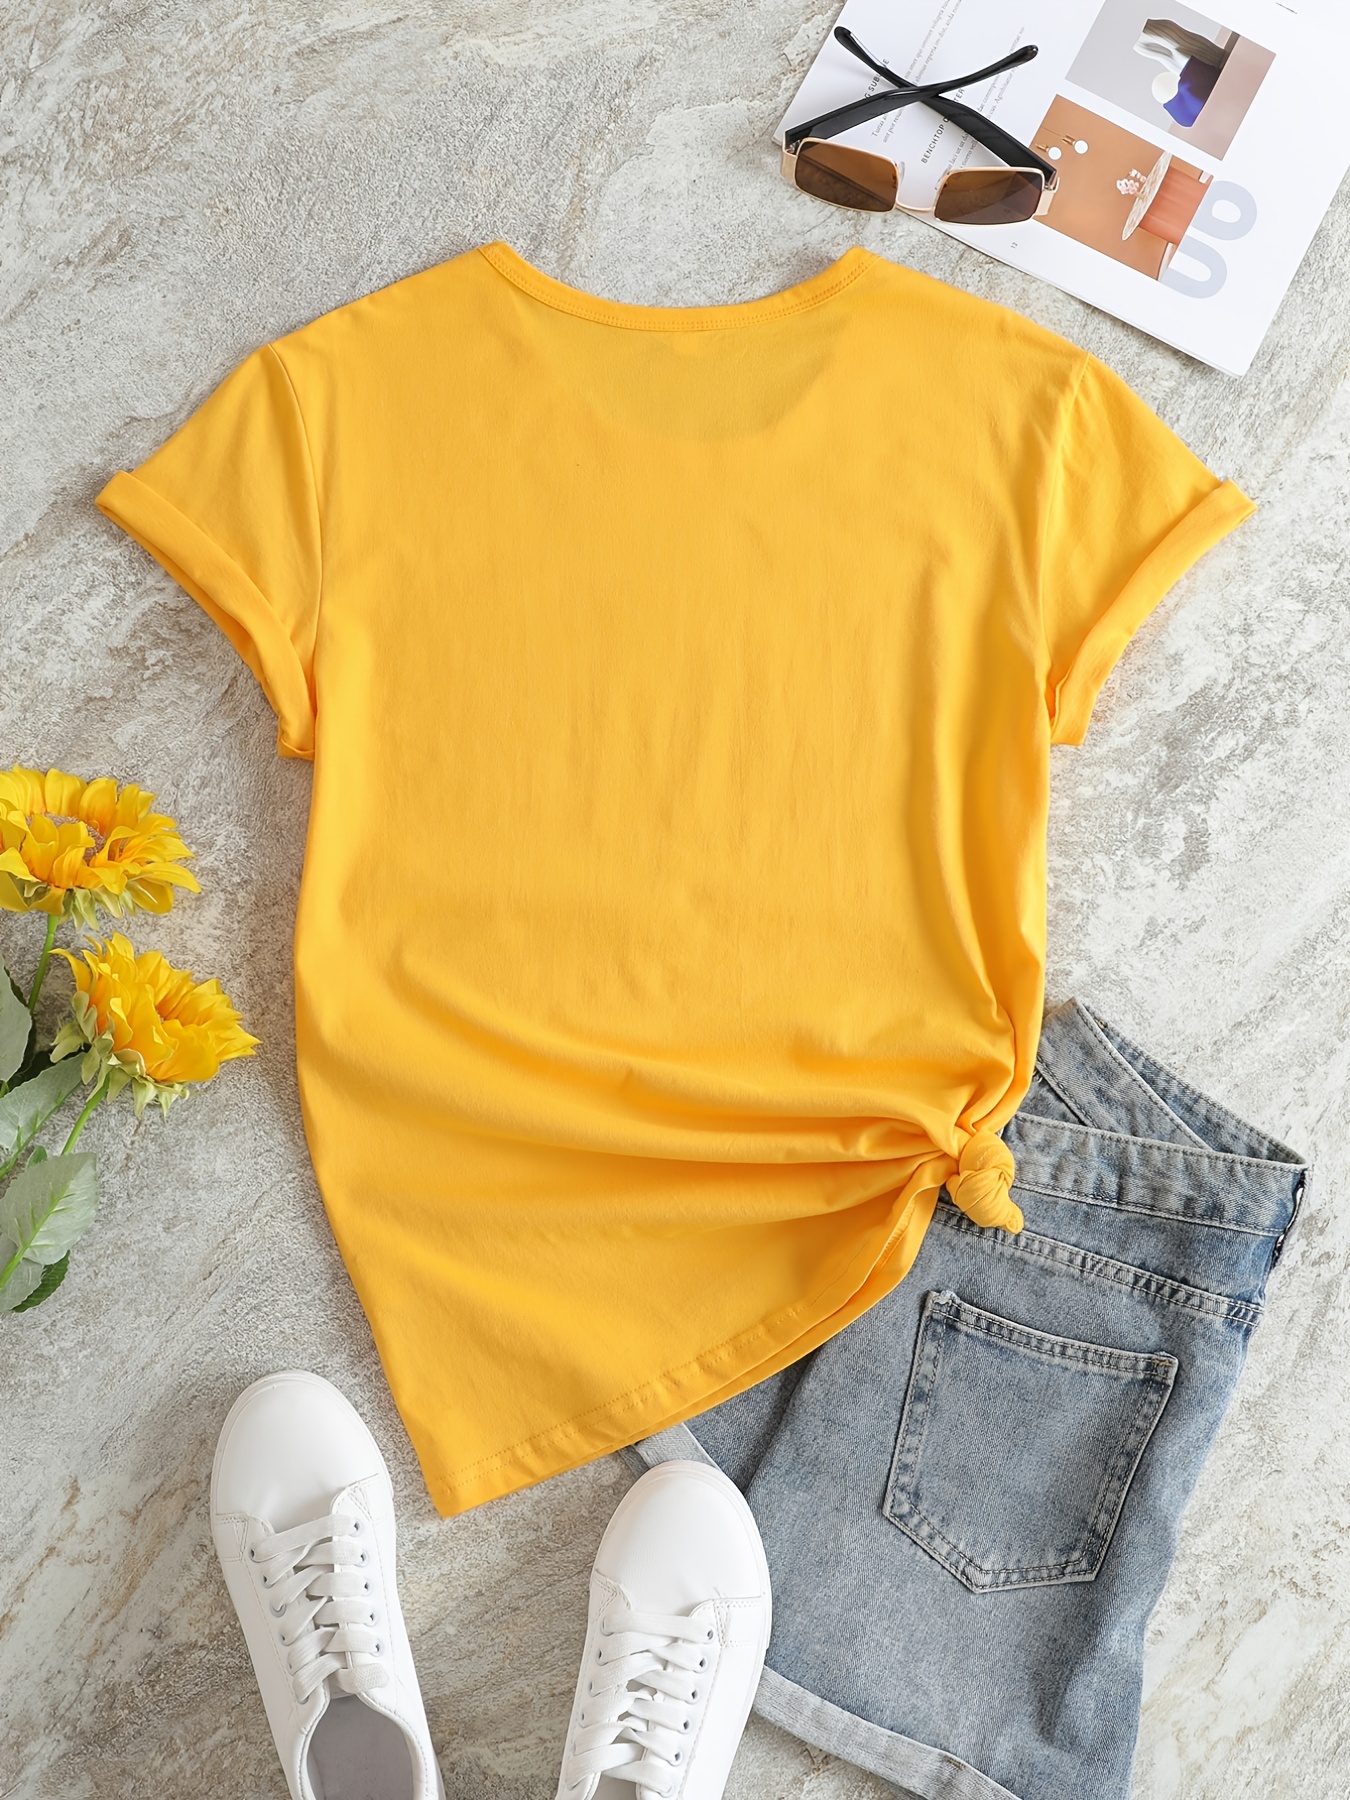 Top Style Other Tops & T-Shirts, Womens